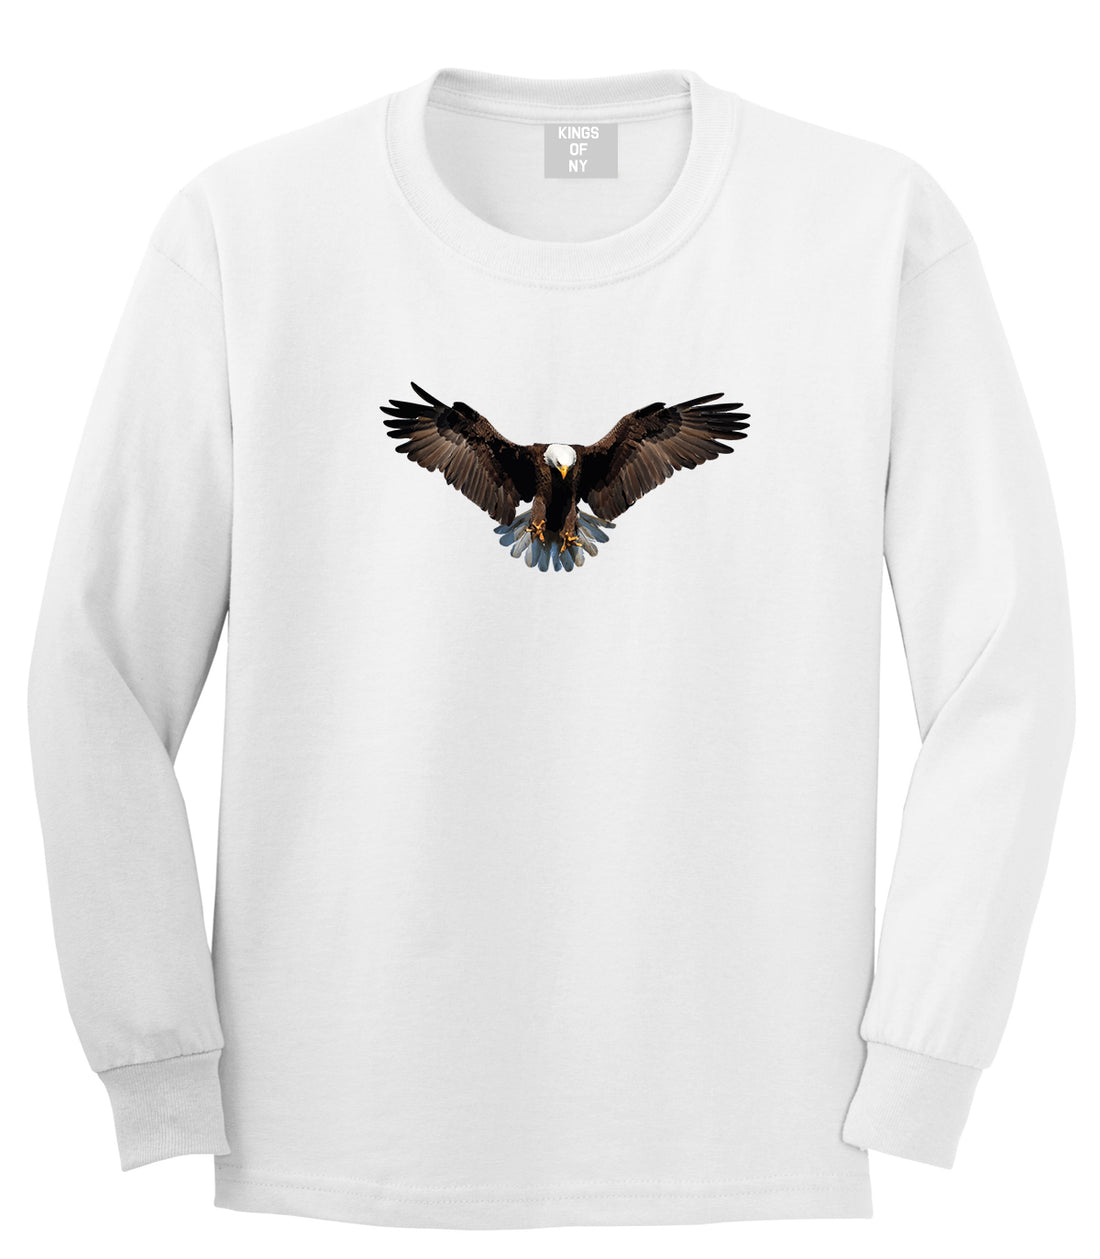 Bald Eagle Wings Spread White Long Sleeve T-Shirt by Kings Of NY